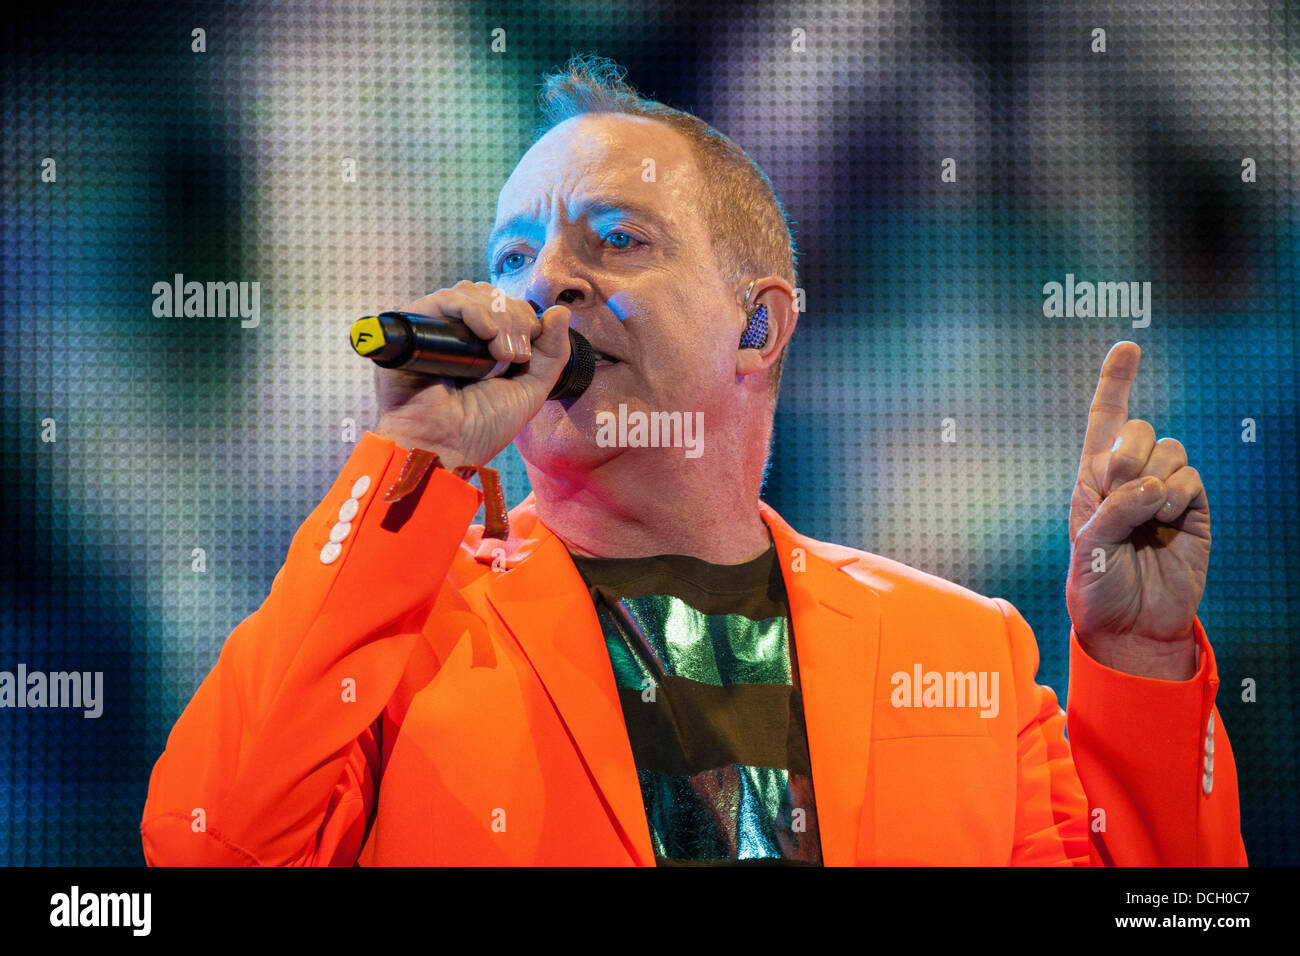 Remenham, Henley-on-Thames, Oxfordshire, UK. 17 August 2013. Fred Schneider frontman and vocalist of the American new wave band THE B-52s performs on-stage at the 2013 'REWIND - The 80s Festival' held 16-17-18 August 2013. Photograph Credit:  2013 John Henshall/Alamy Live News. PER0350 Stock Photo